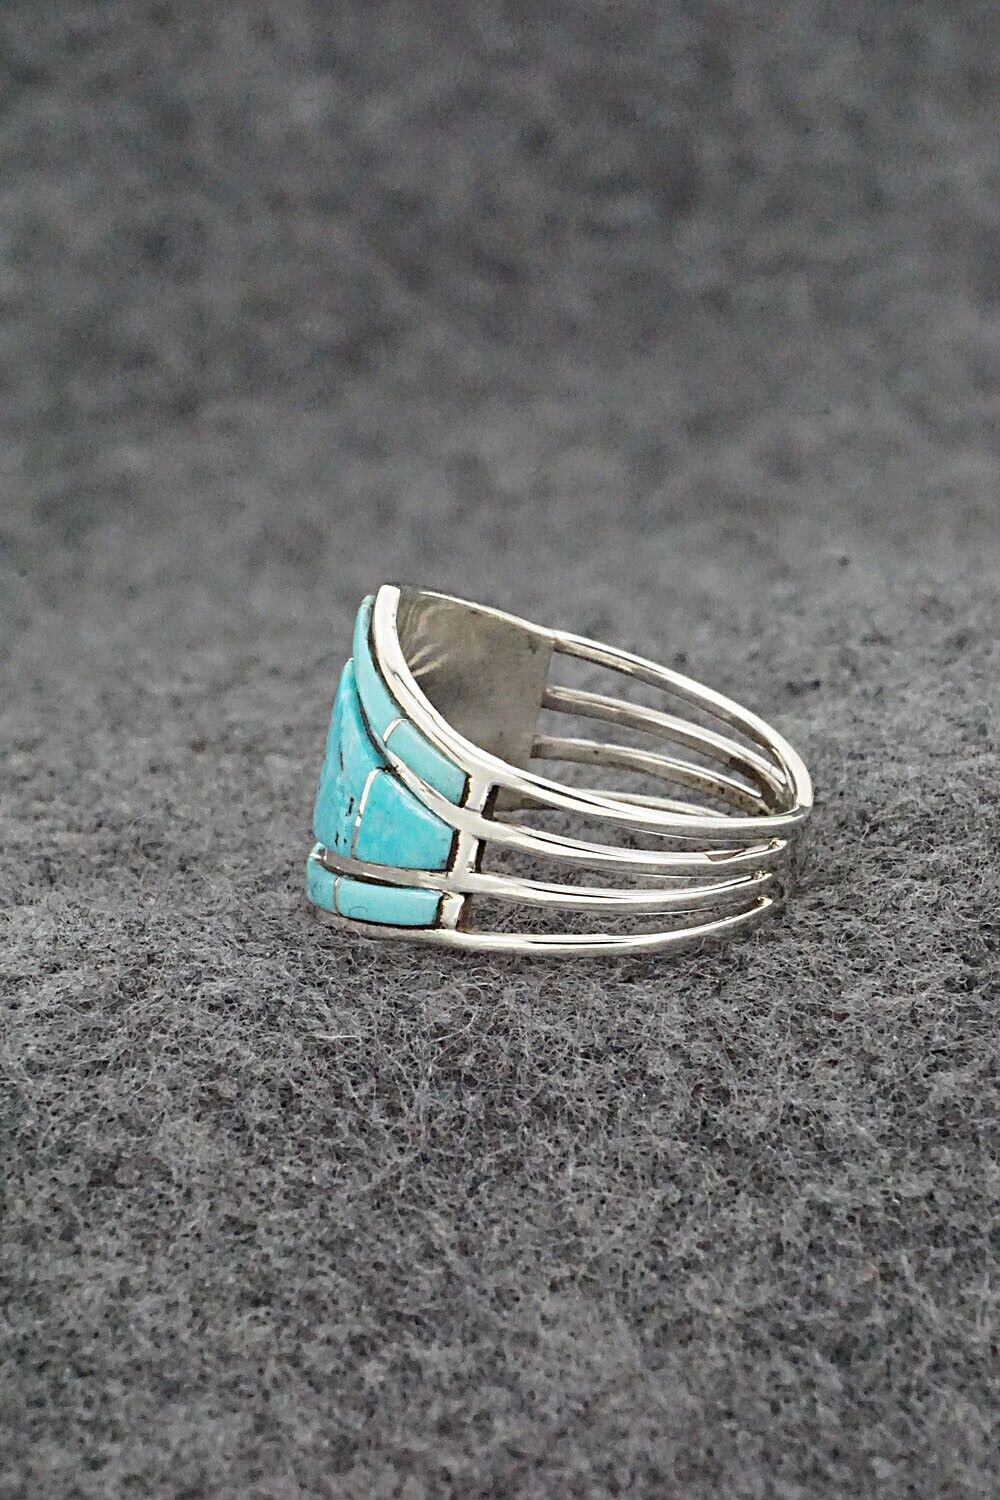 Turquoise & Sterling Silver Ring - Andrew Enrico - Size 10